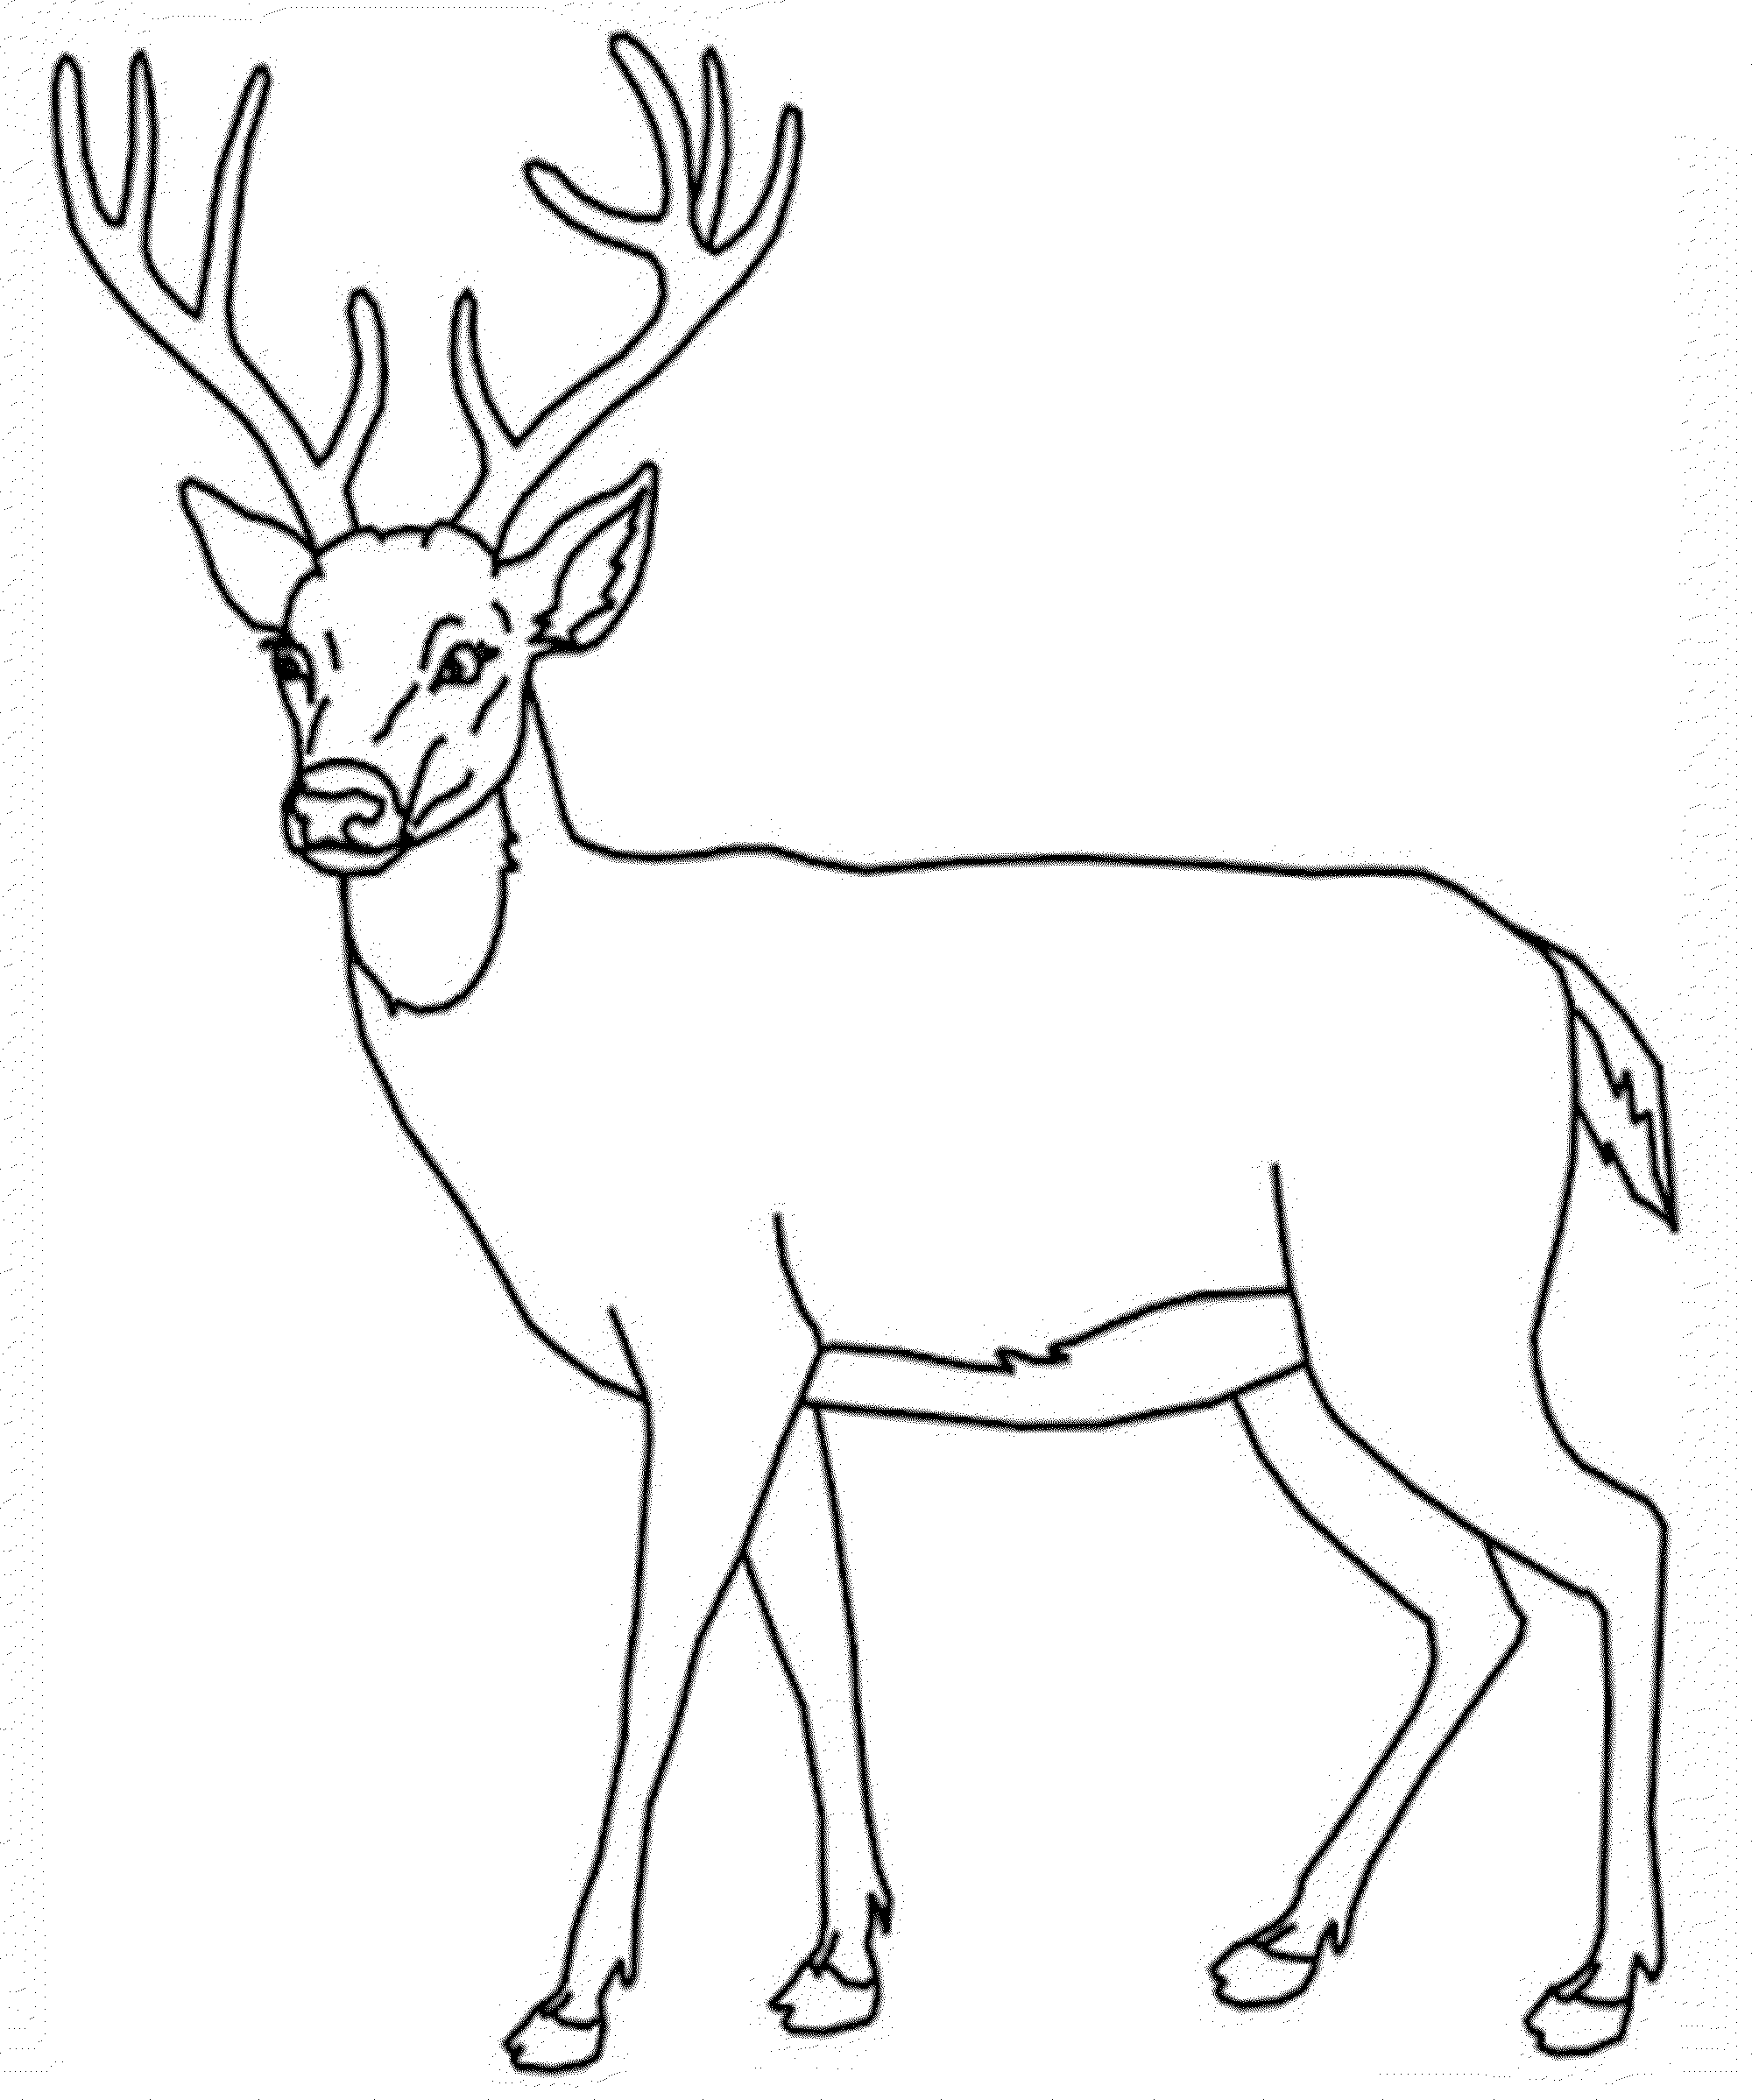 whitetail deer coloring pages - Printable Kids Colouring Pages